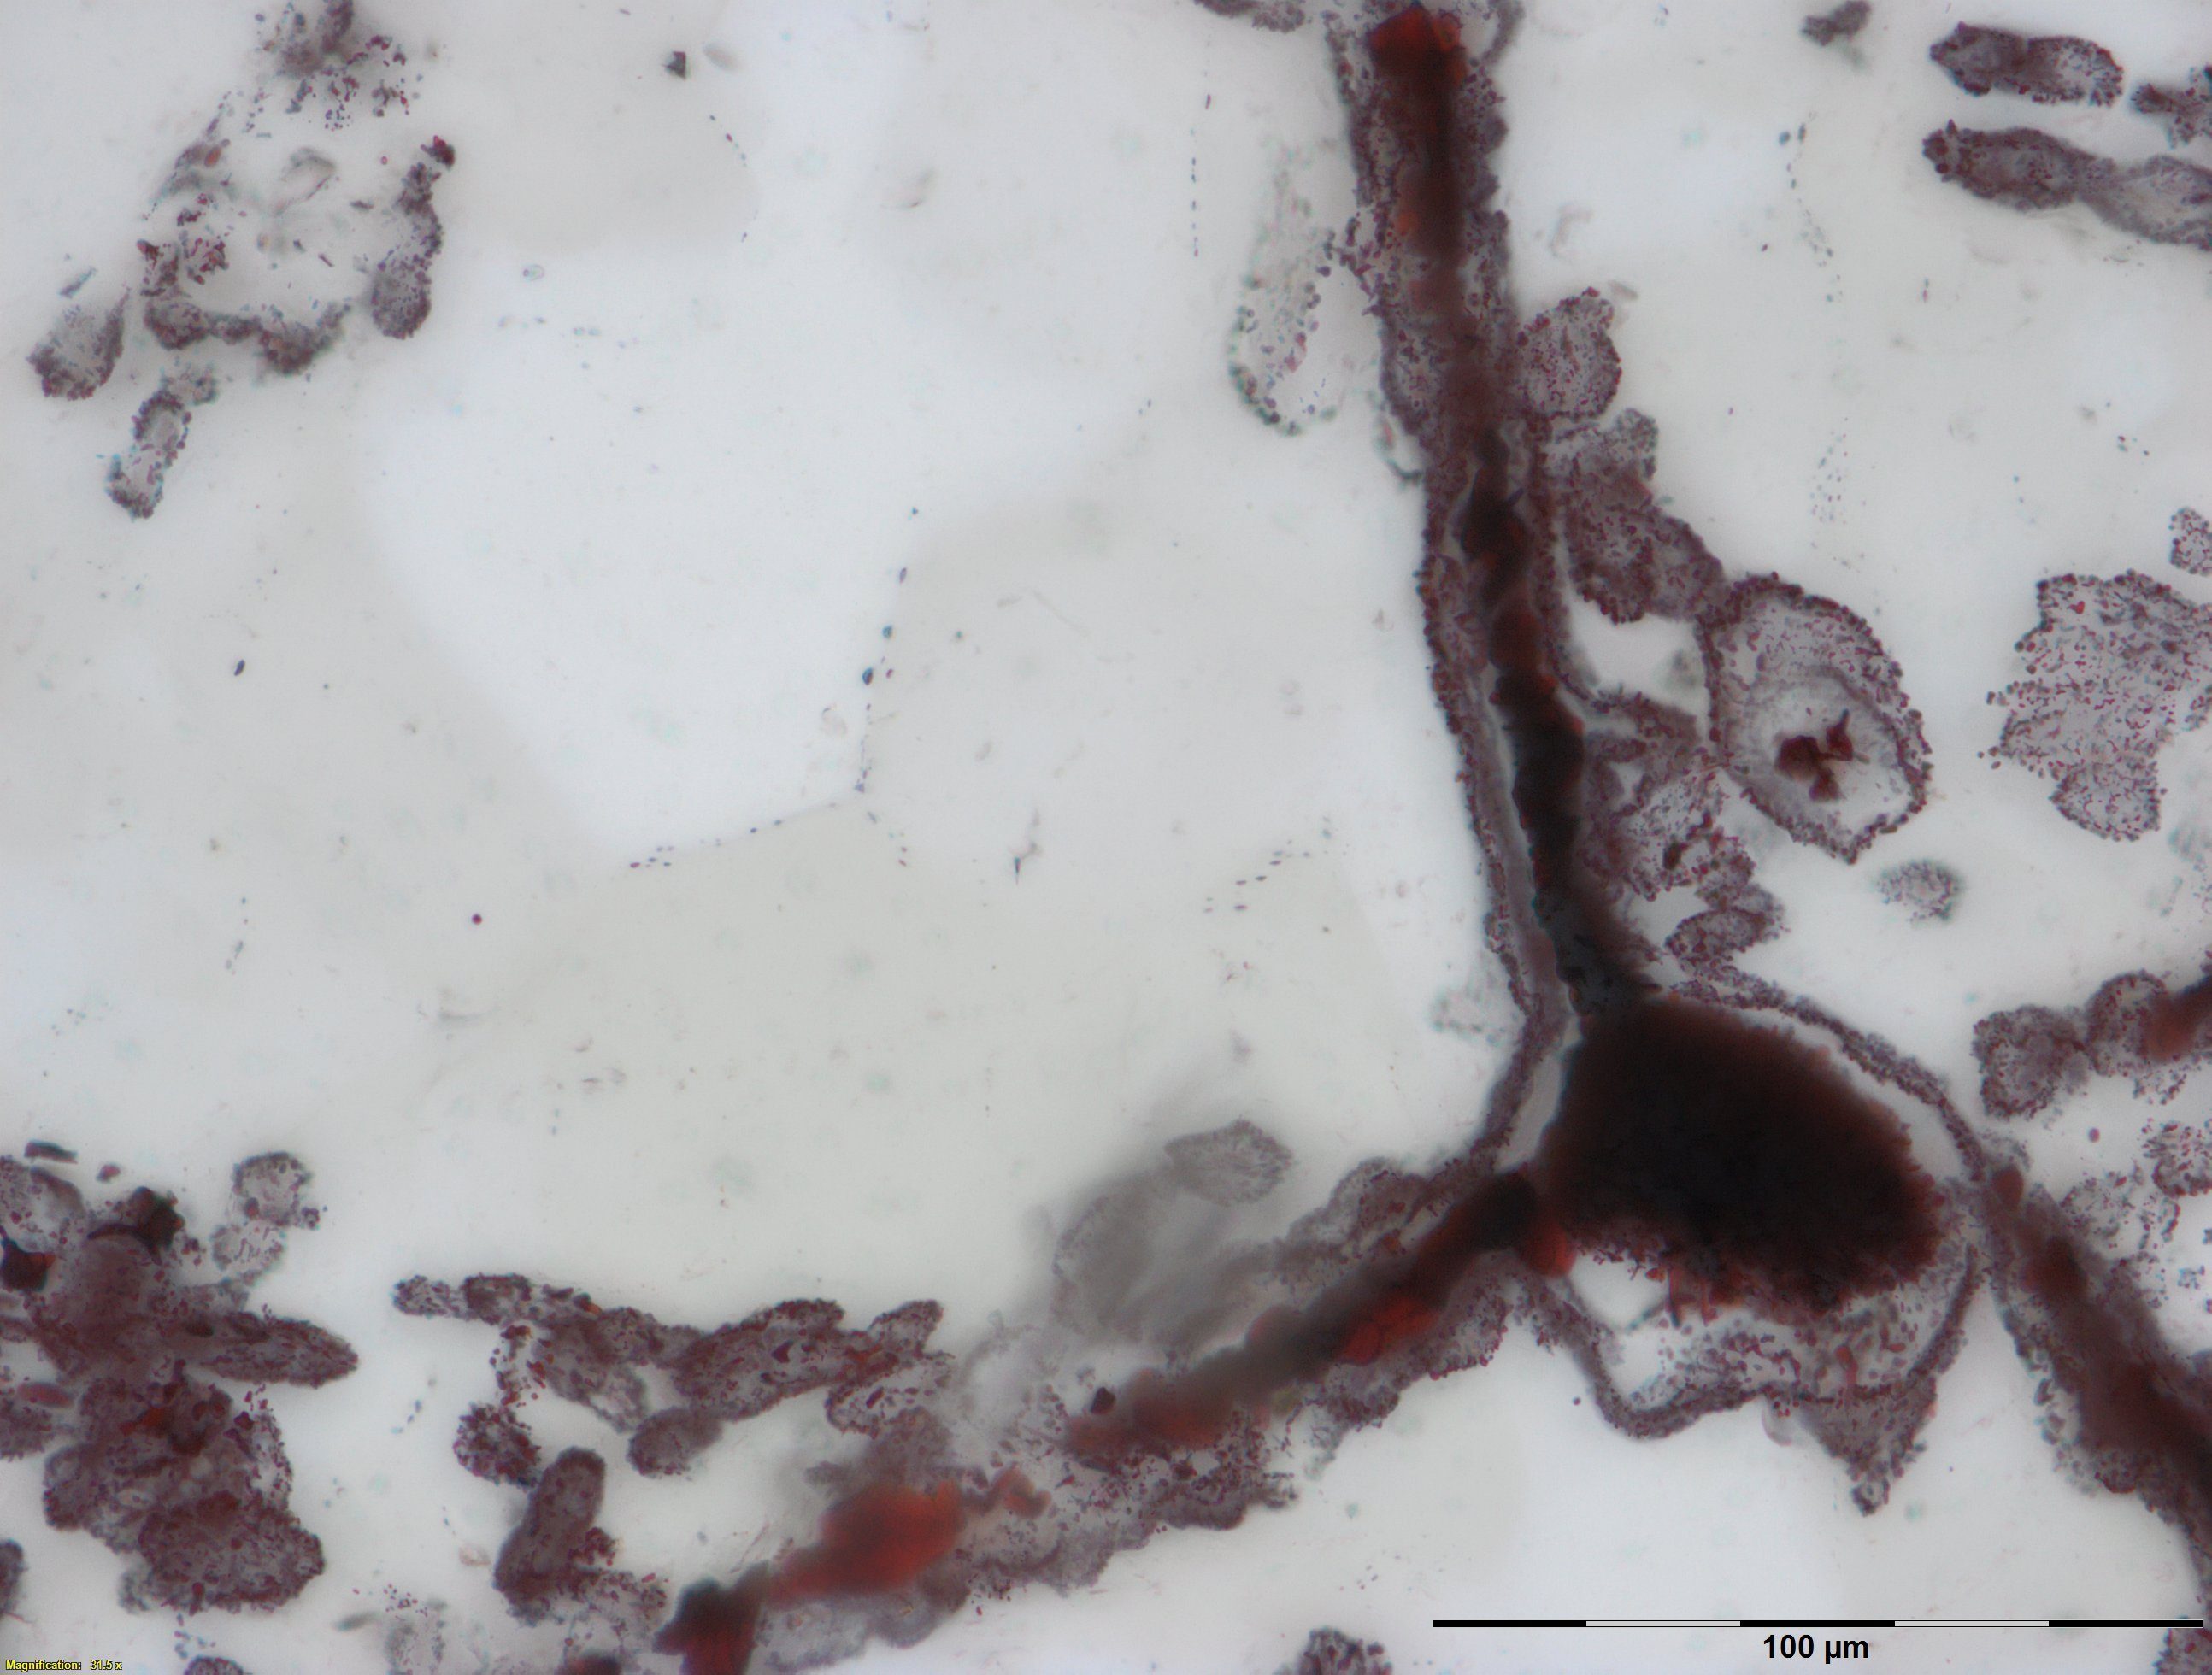 Haematite filament attached to a clump of iron in the lower right, from hydrothermal vent deposits in the Nuvvuagittuq Supracrustal Belt in Quebec, Canada. These clumps of iron and filaments were microbial cells and are similar to modern microbes found in vent environments. Credit: M.Dodd 